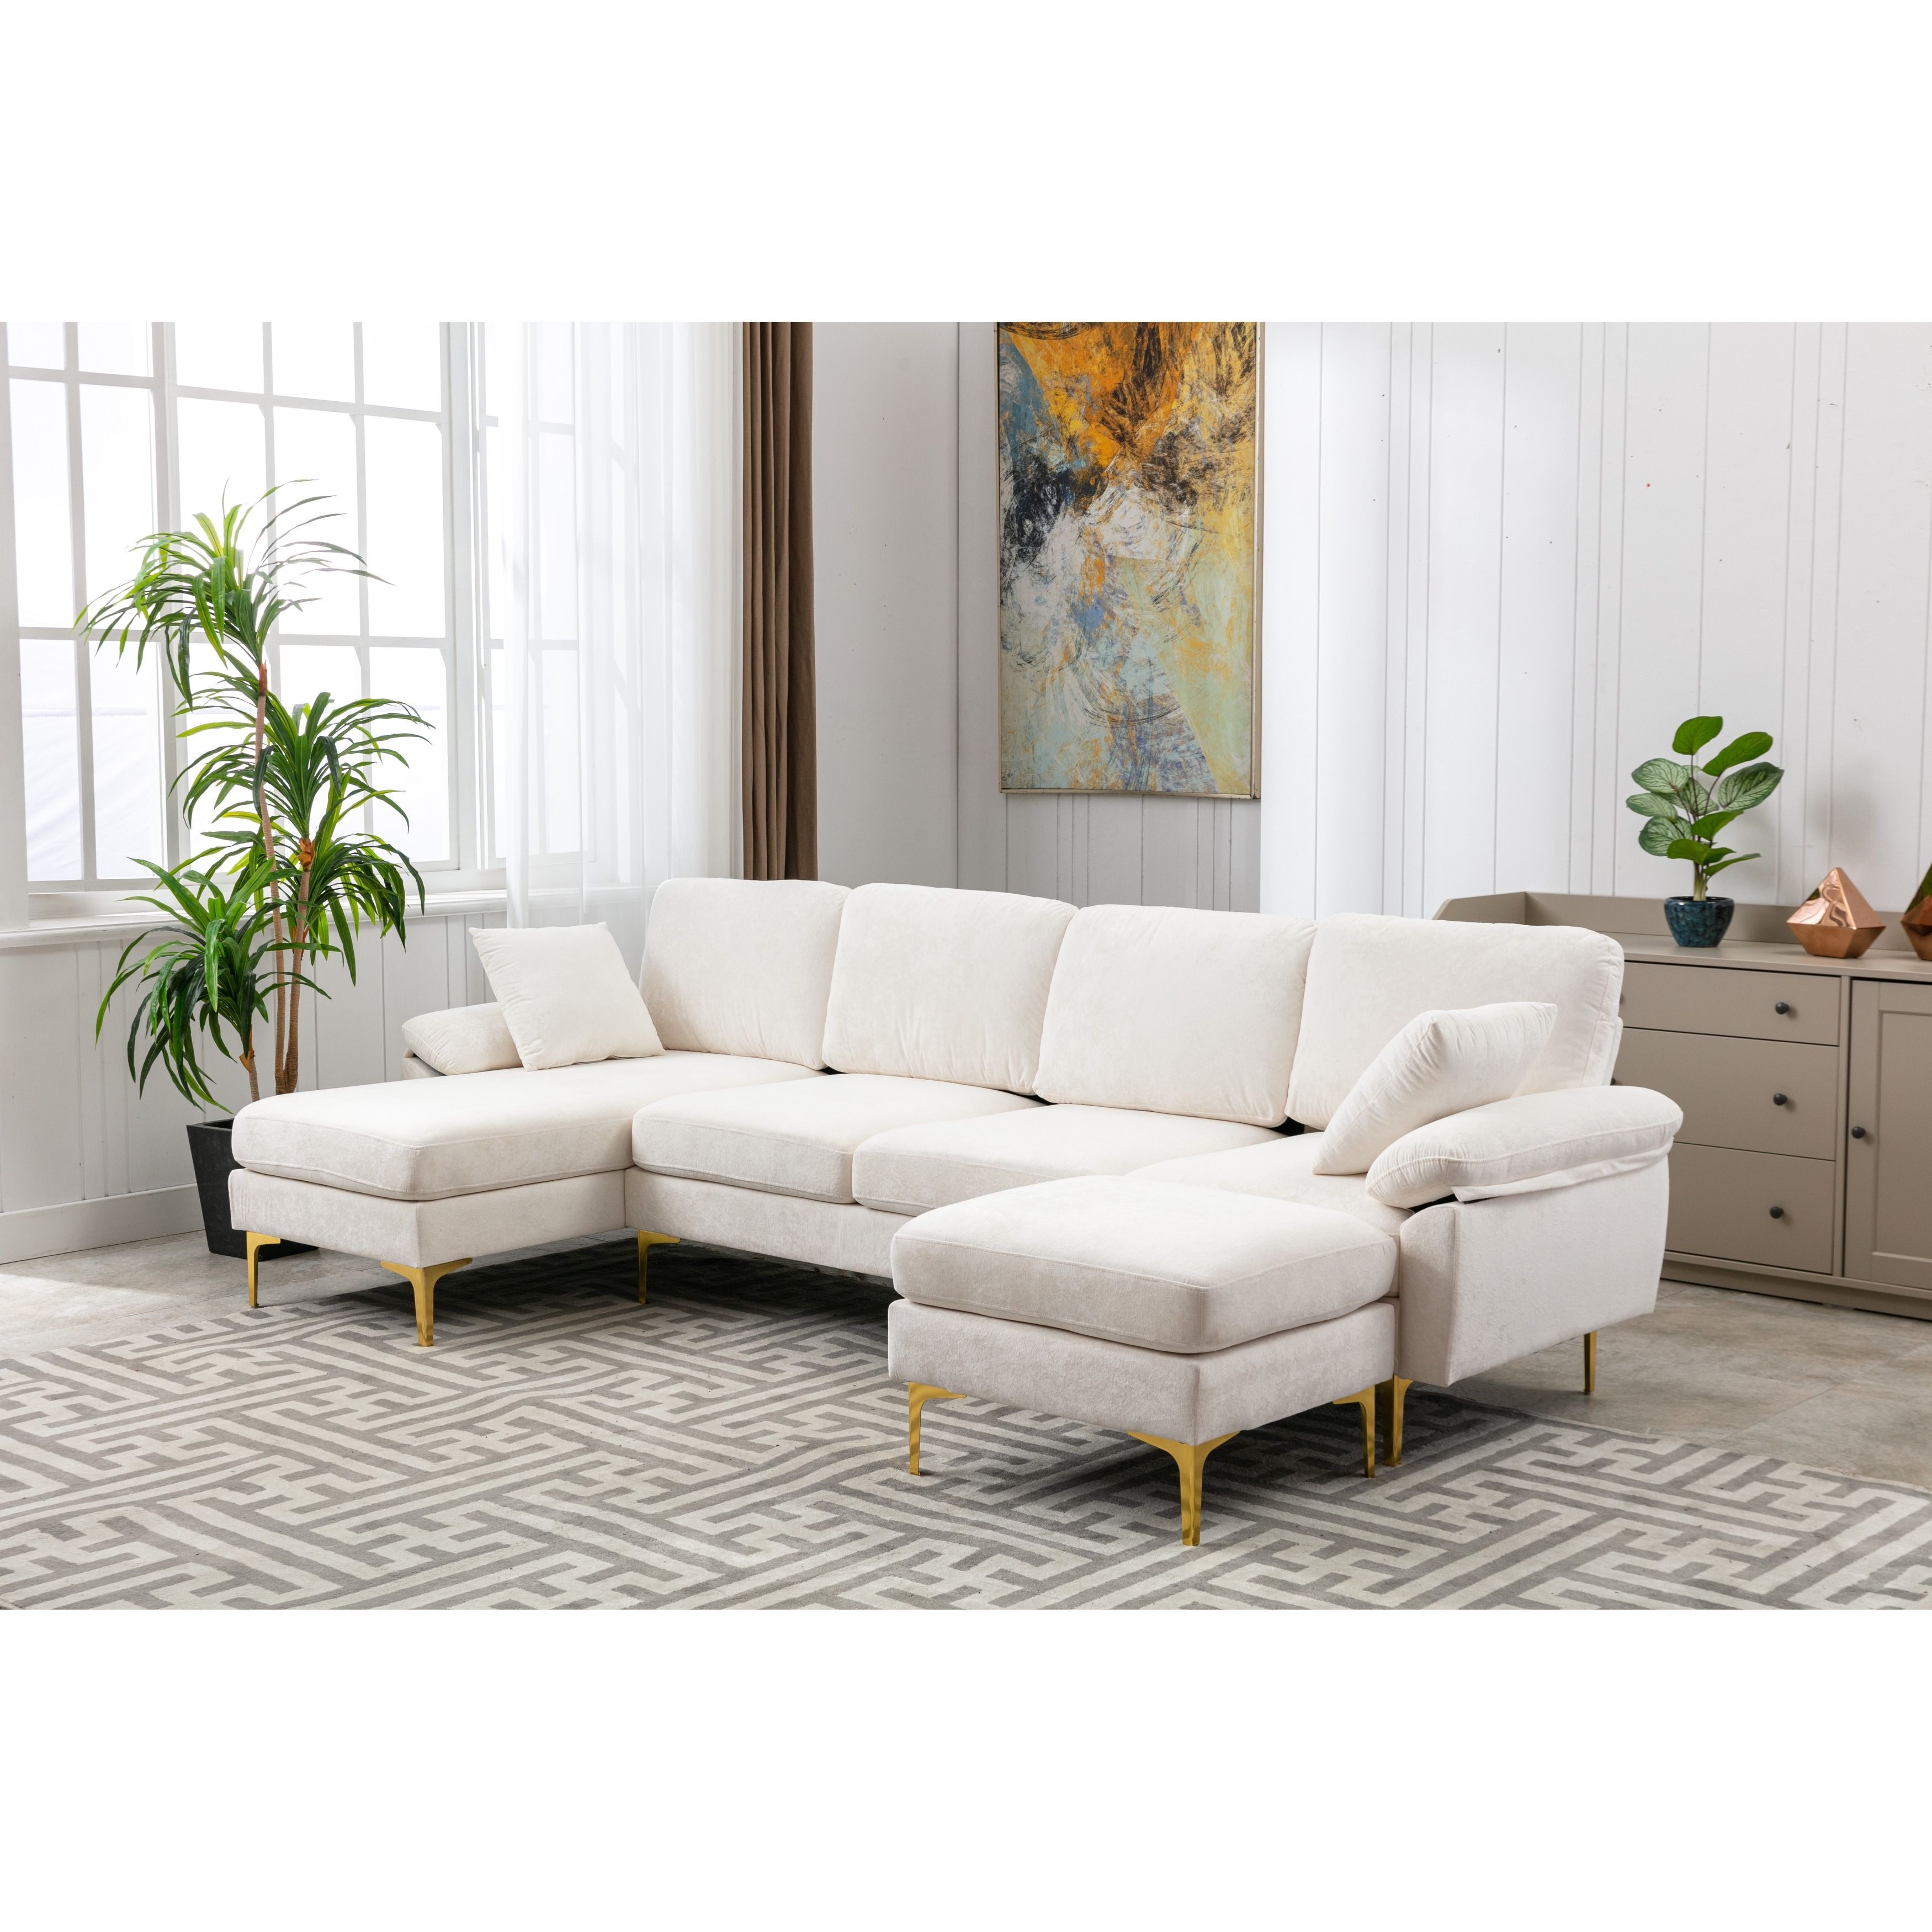 Living Room Sectional Sofa, L Shaped Upholstered Couch With Movable Ottoman,  Convertible Modular Sofa With Gold Metal Legs – On Sale – – 37311561 Intended For Sectional Sofas With Movable Ottoman (View 12 of 20)